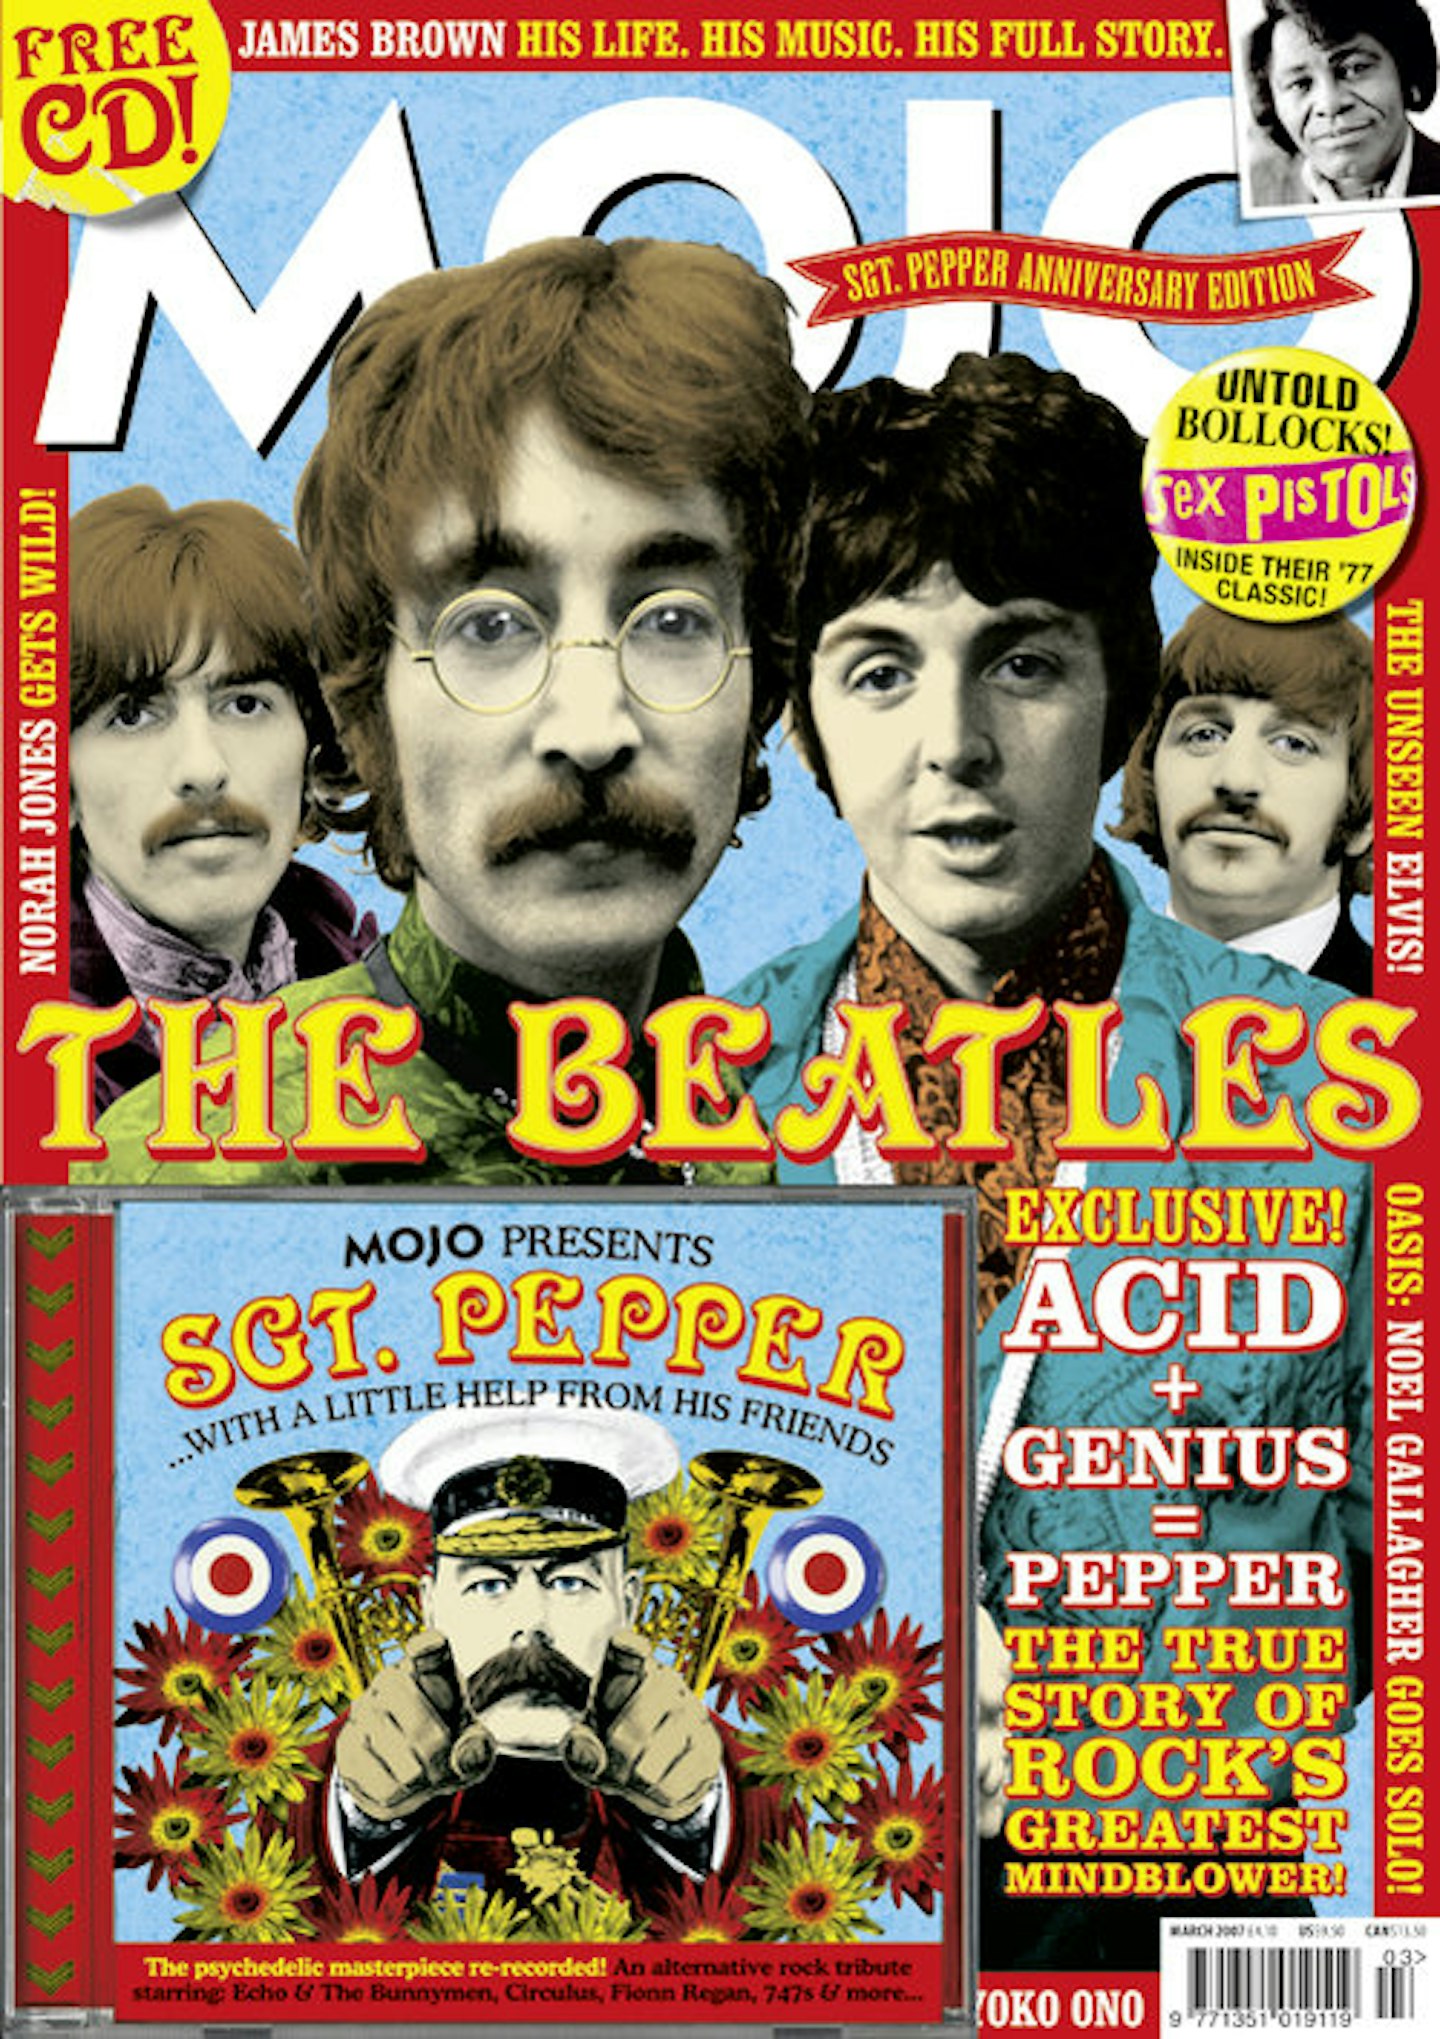 MOJO Issue 160 / March 2007